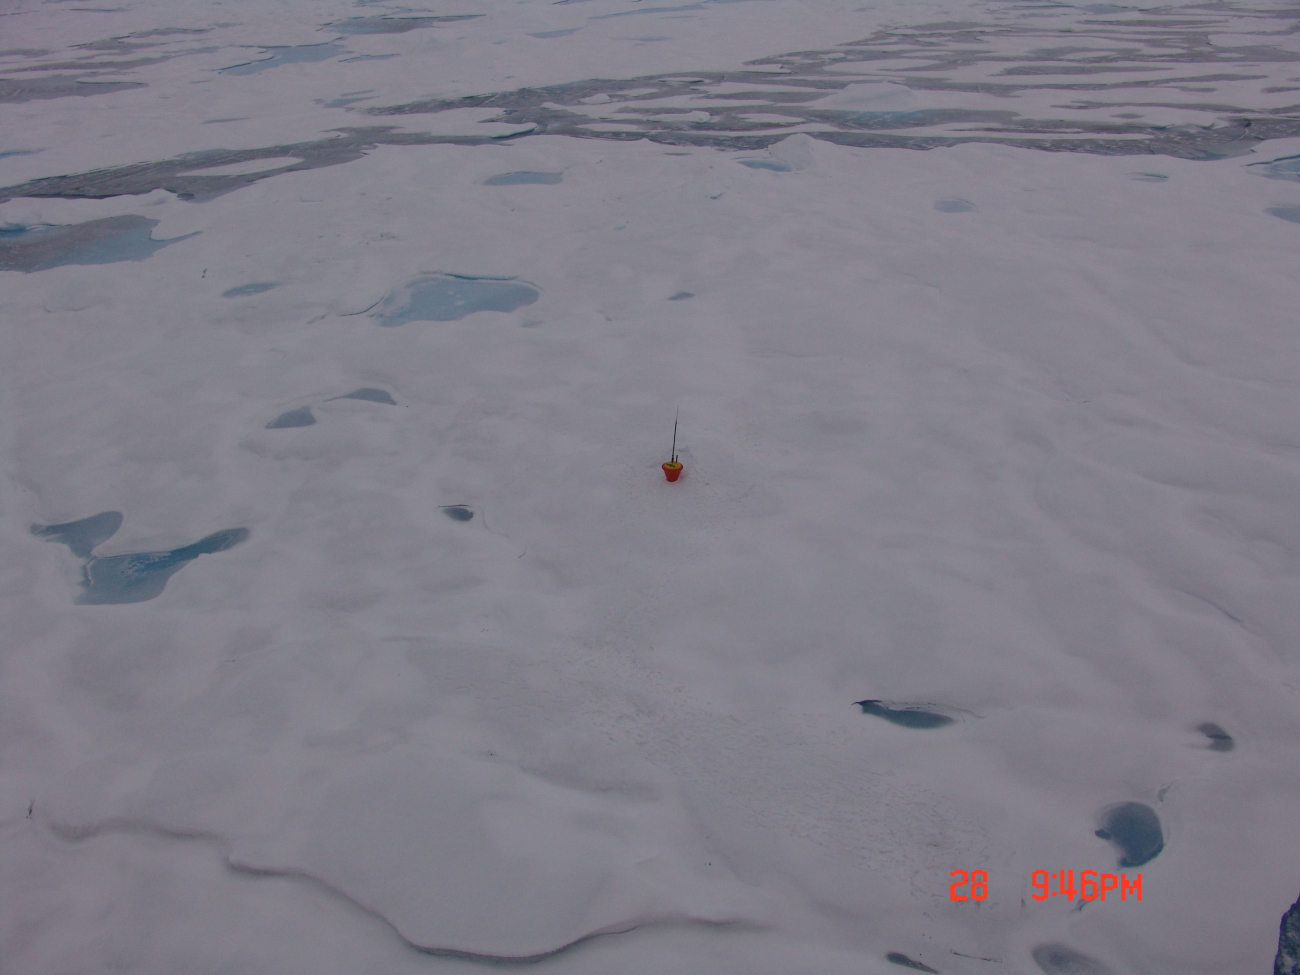 Ice buoy left to its uncertain future as the ice will melt and remelt, it willdrift, and perhaps this area will be subjected to crushing forces throwing upgreat ice ridges